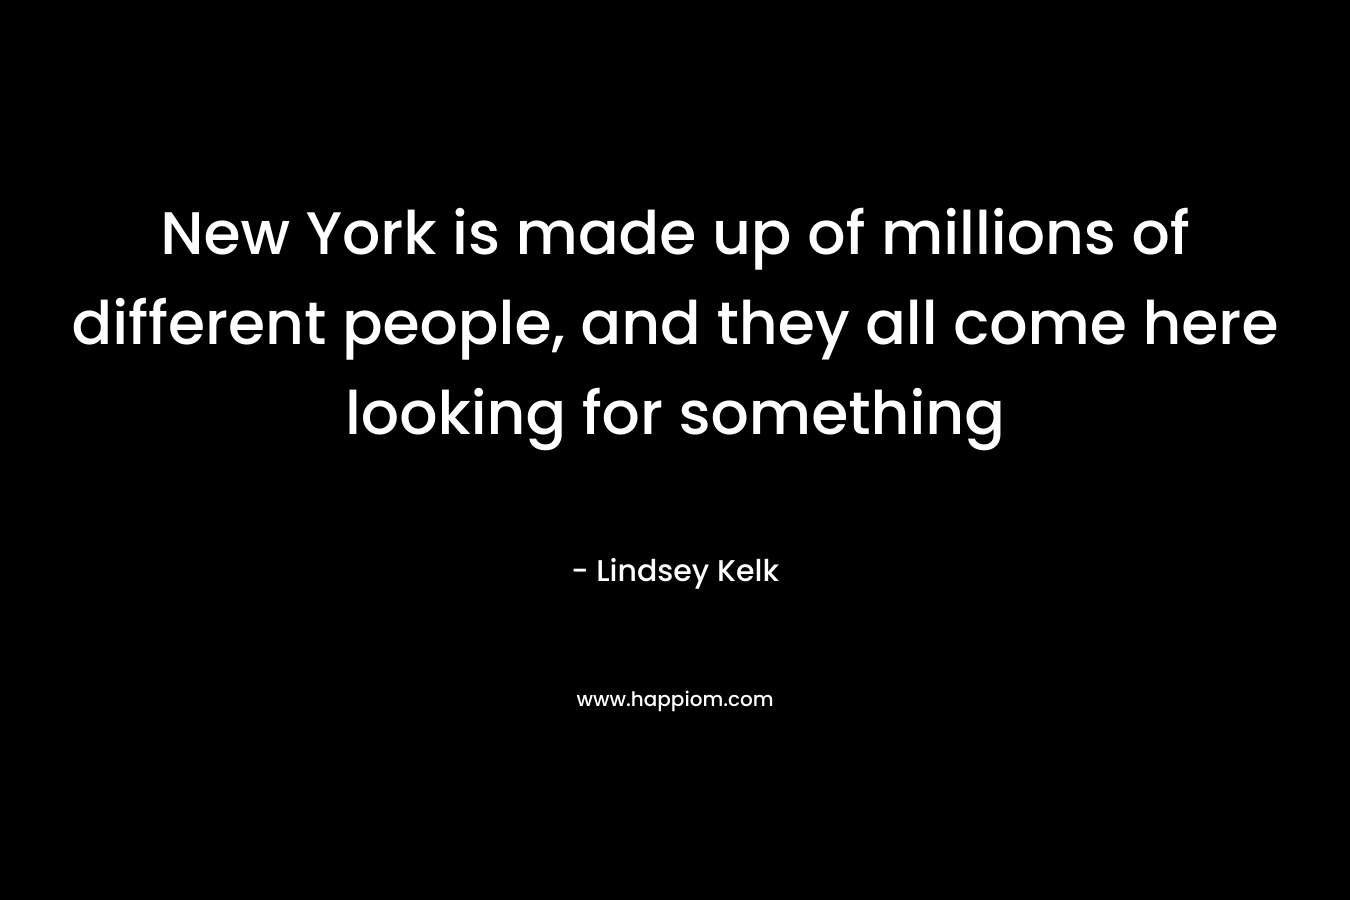 New York is made up of millions of different people, and they all come here looking for something